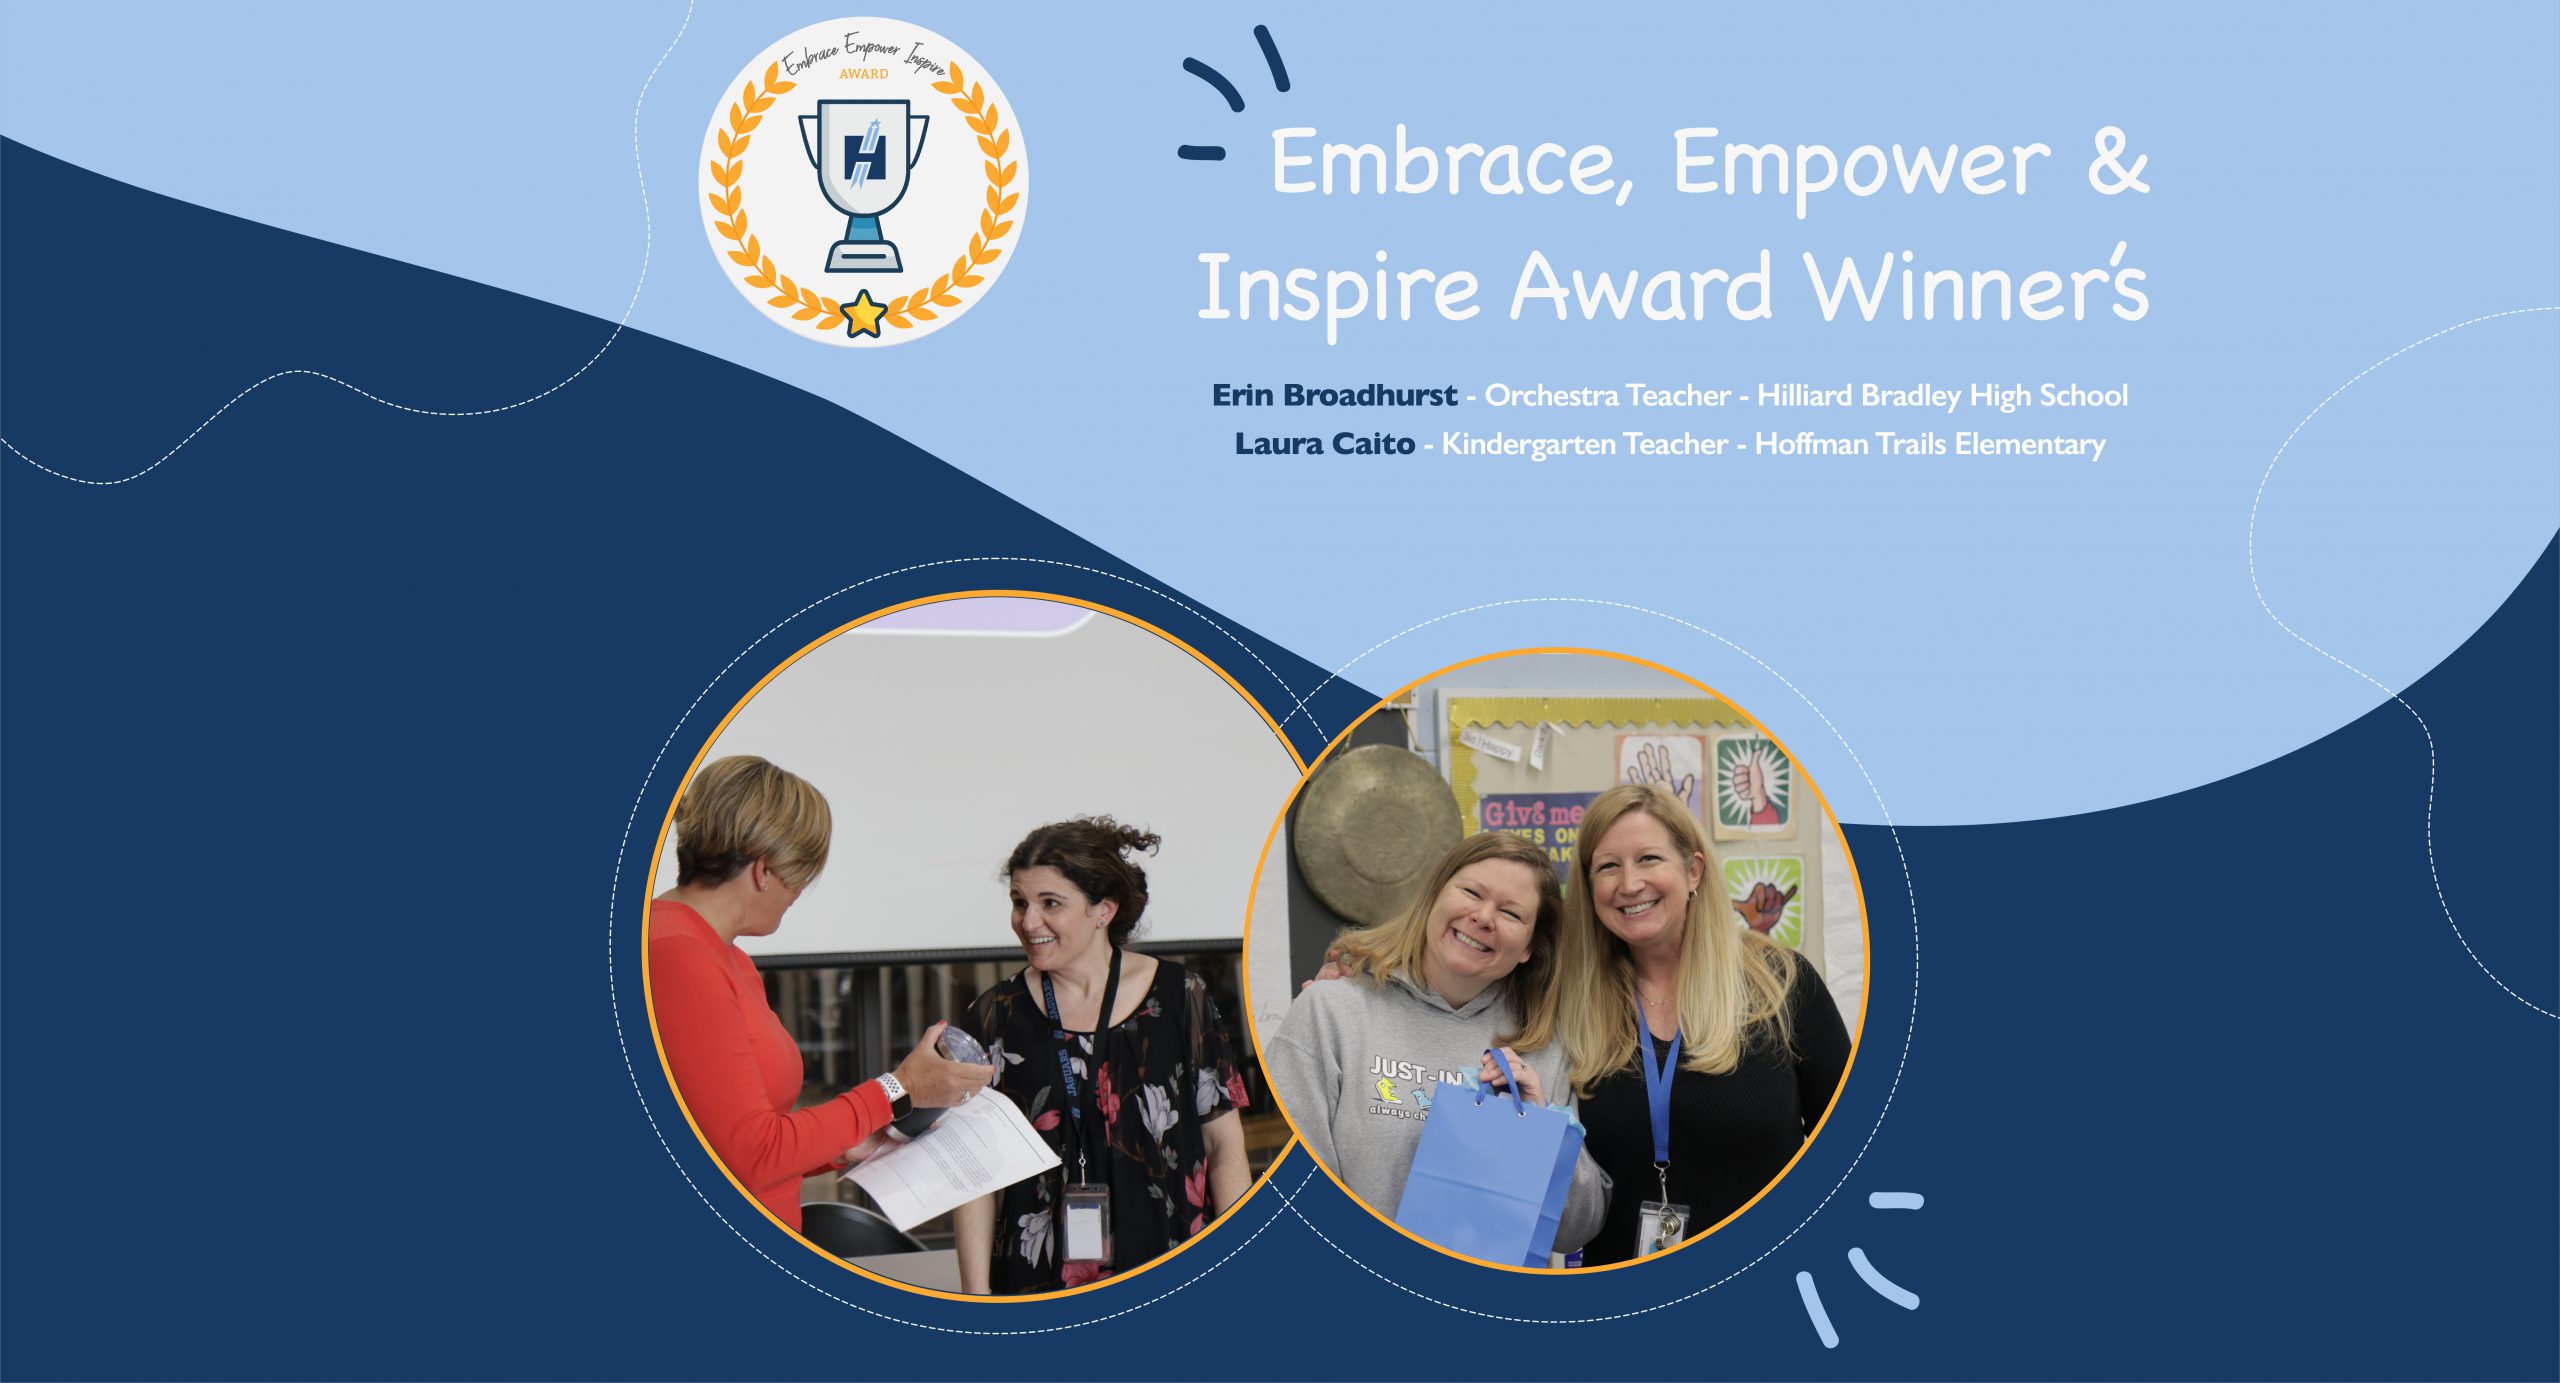 Winners of the Embrace, Empower & Inspire Award